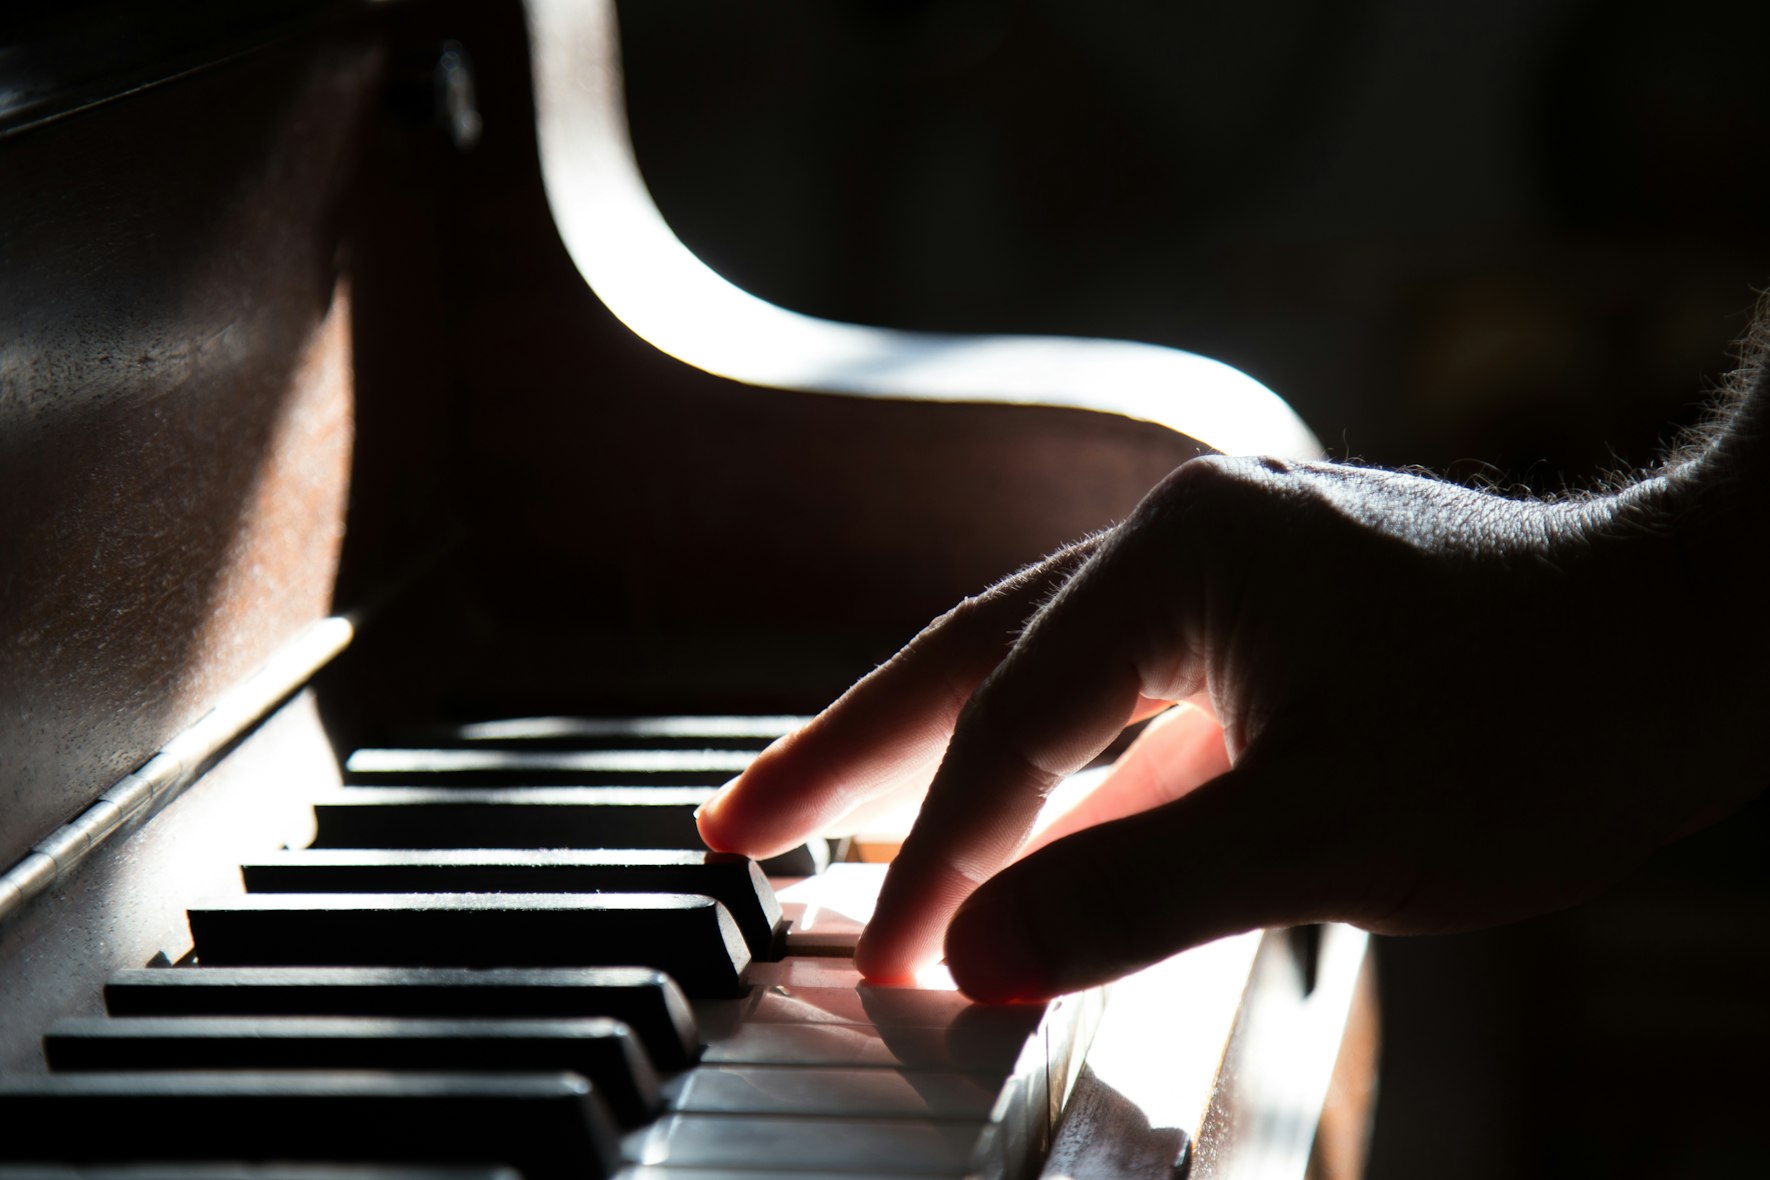 Up close of hand: fingers pressing down keys of a piano.